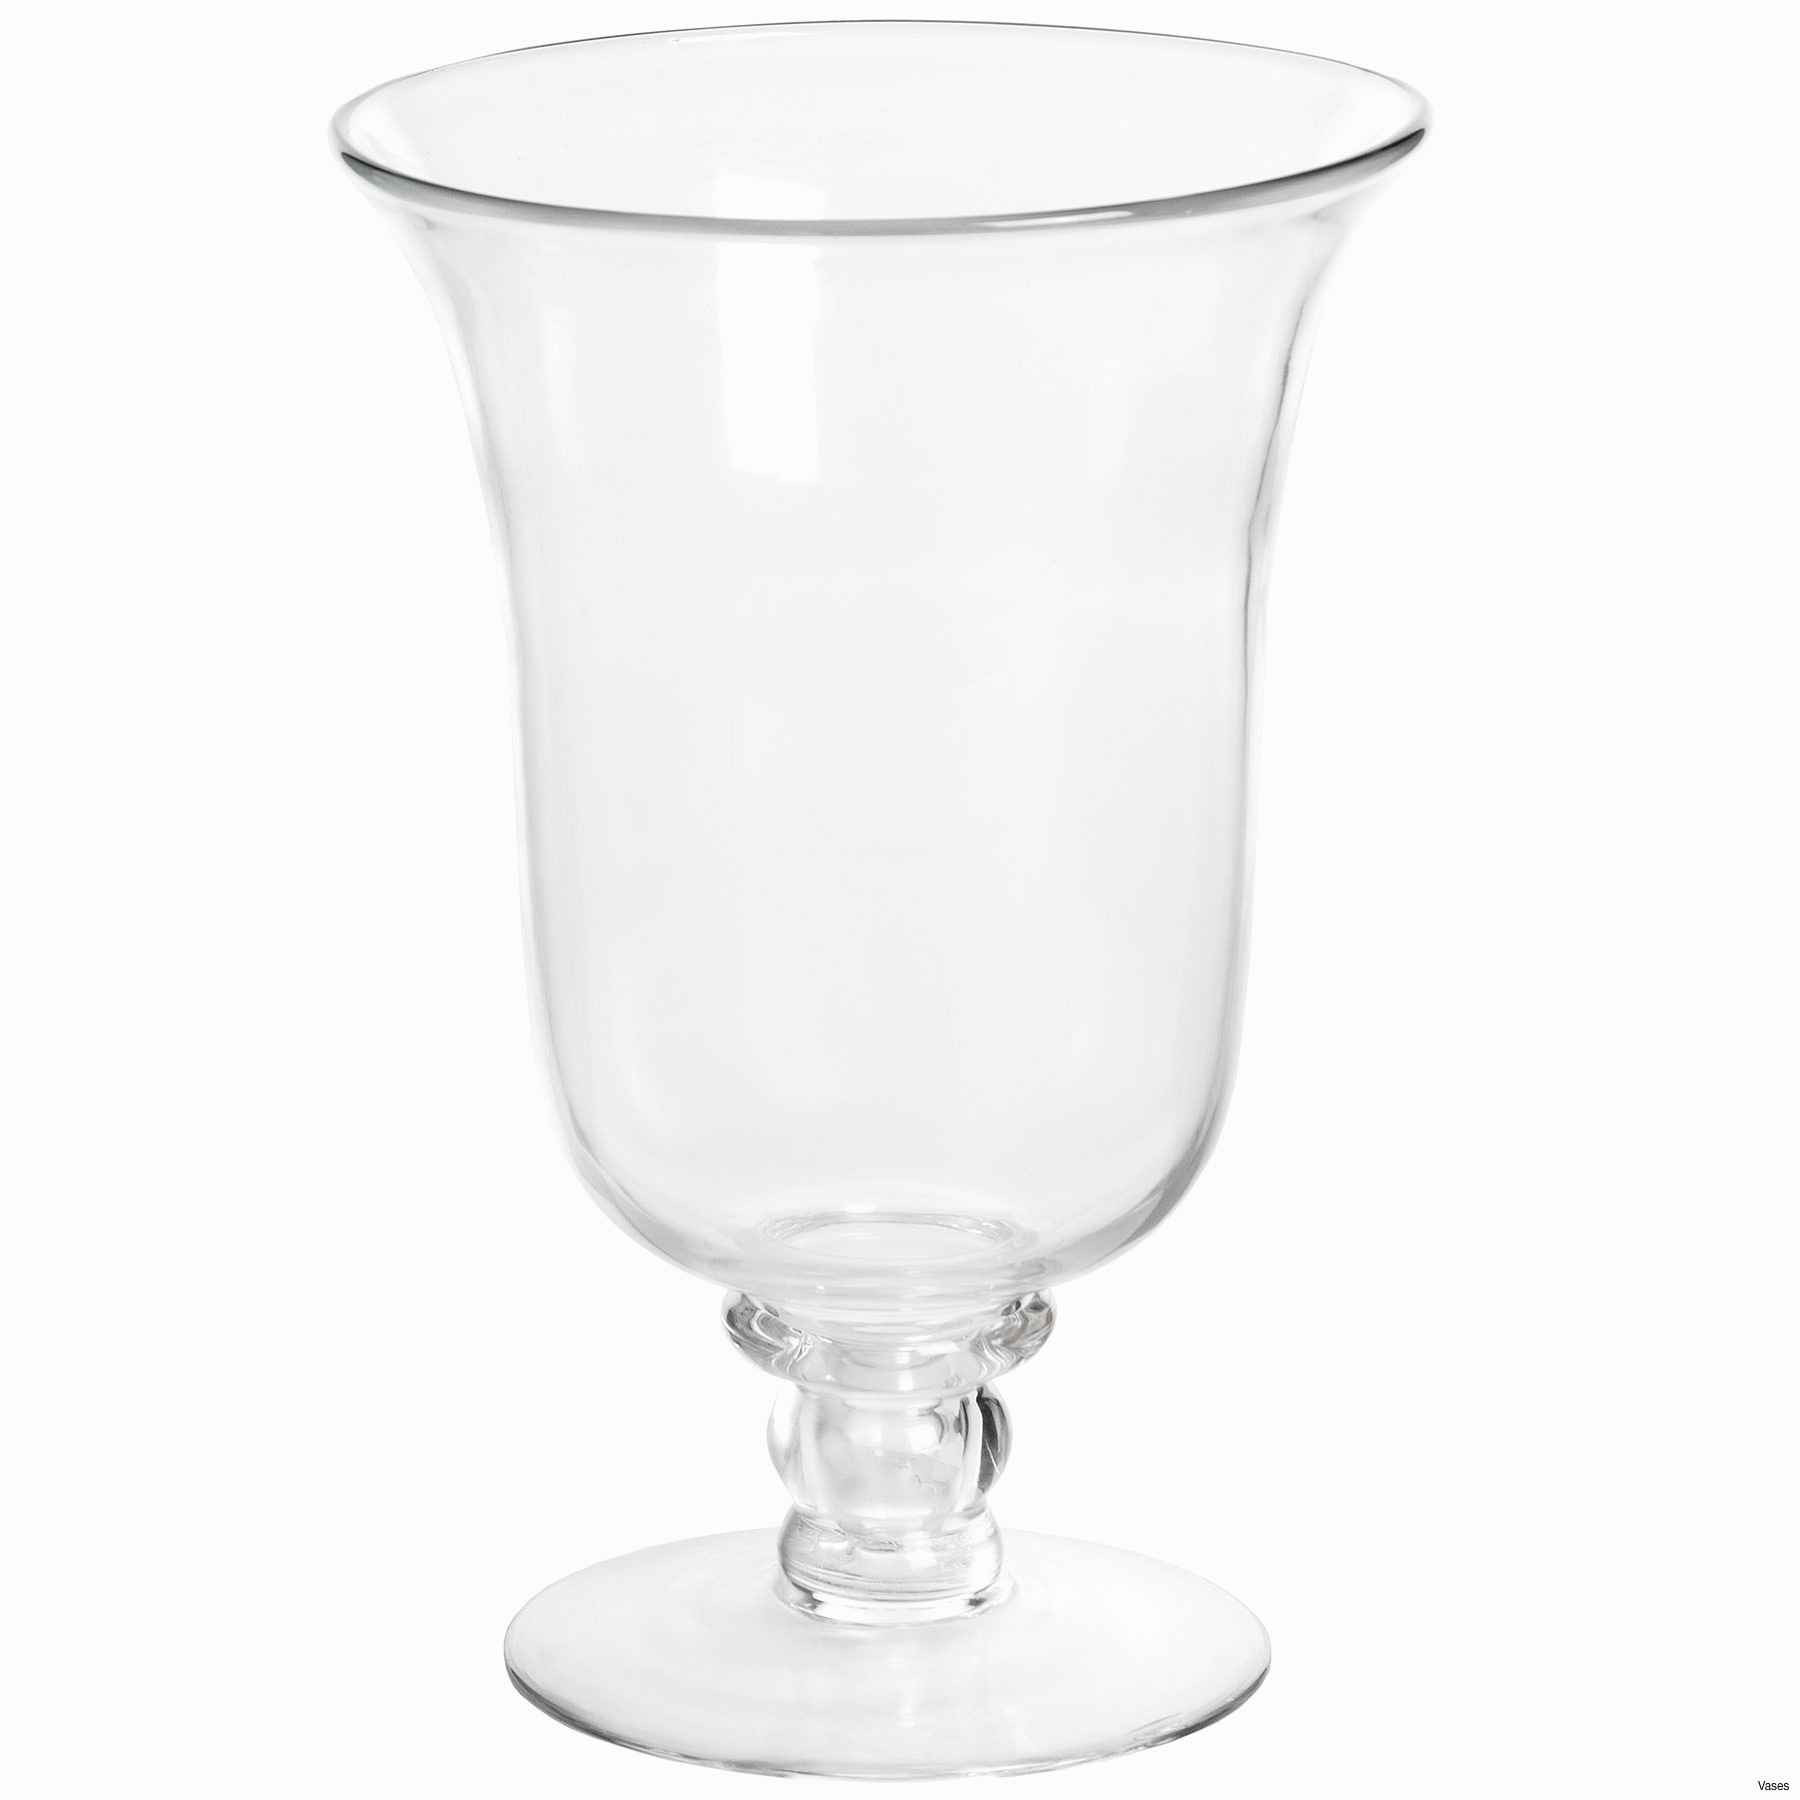 14 Great Clear Cylinder Vases In Bulk 2024 free download clear cylinder vases in bulk of candle stands wholesale lovely faux crystal candle holders alive for candle stands wholesale lovely faux crystal candle holders alive vases gold tall jpgi 0d 